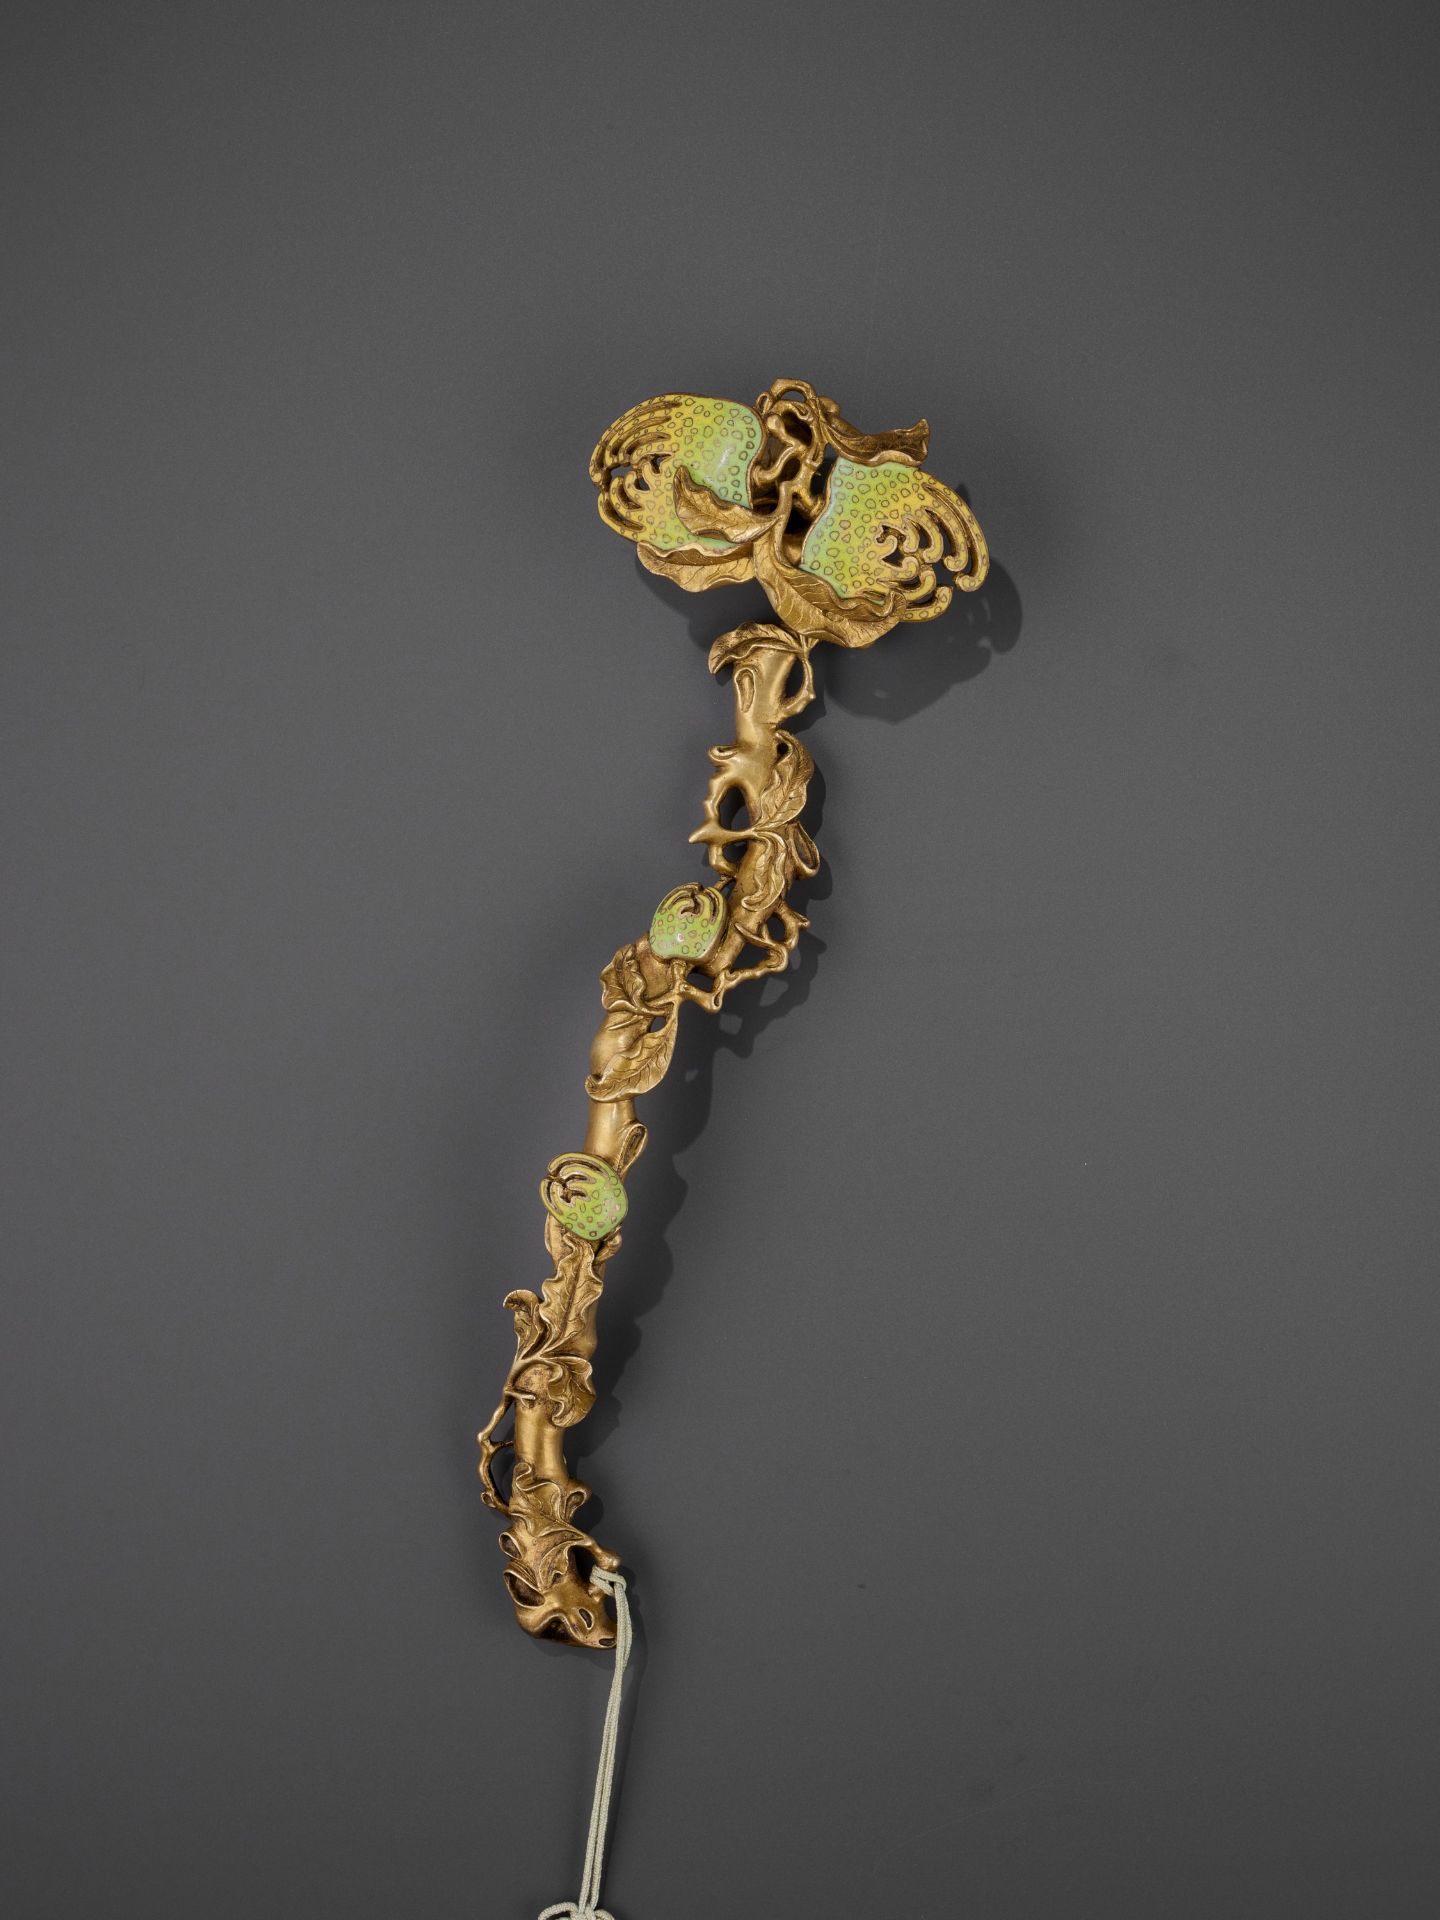 A CHAMPLEVE ENAMEL 'BUDDHA'S HAND' RUYI SCEPTER, QING DYNASTY - Image 7 of 11